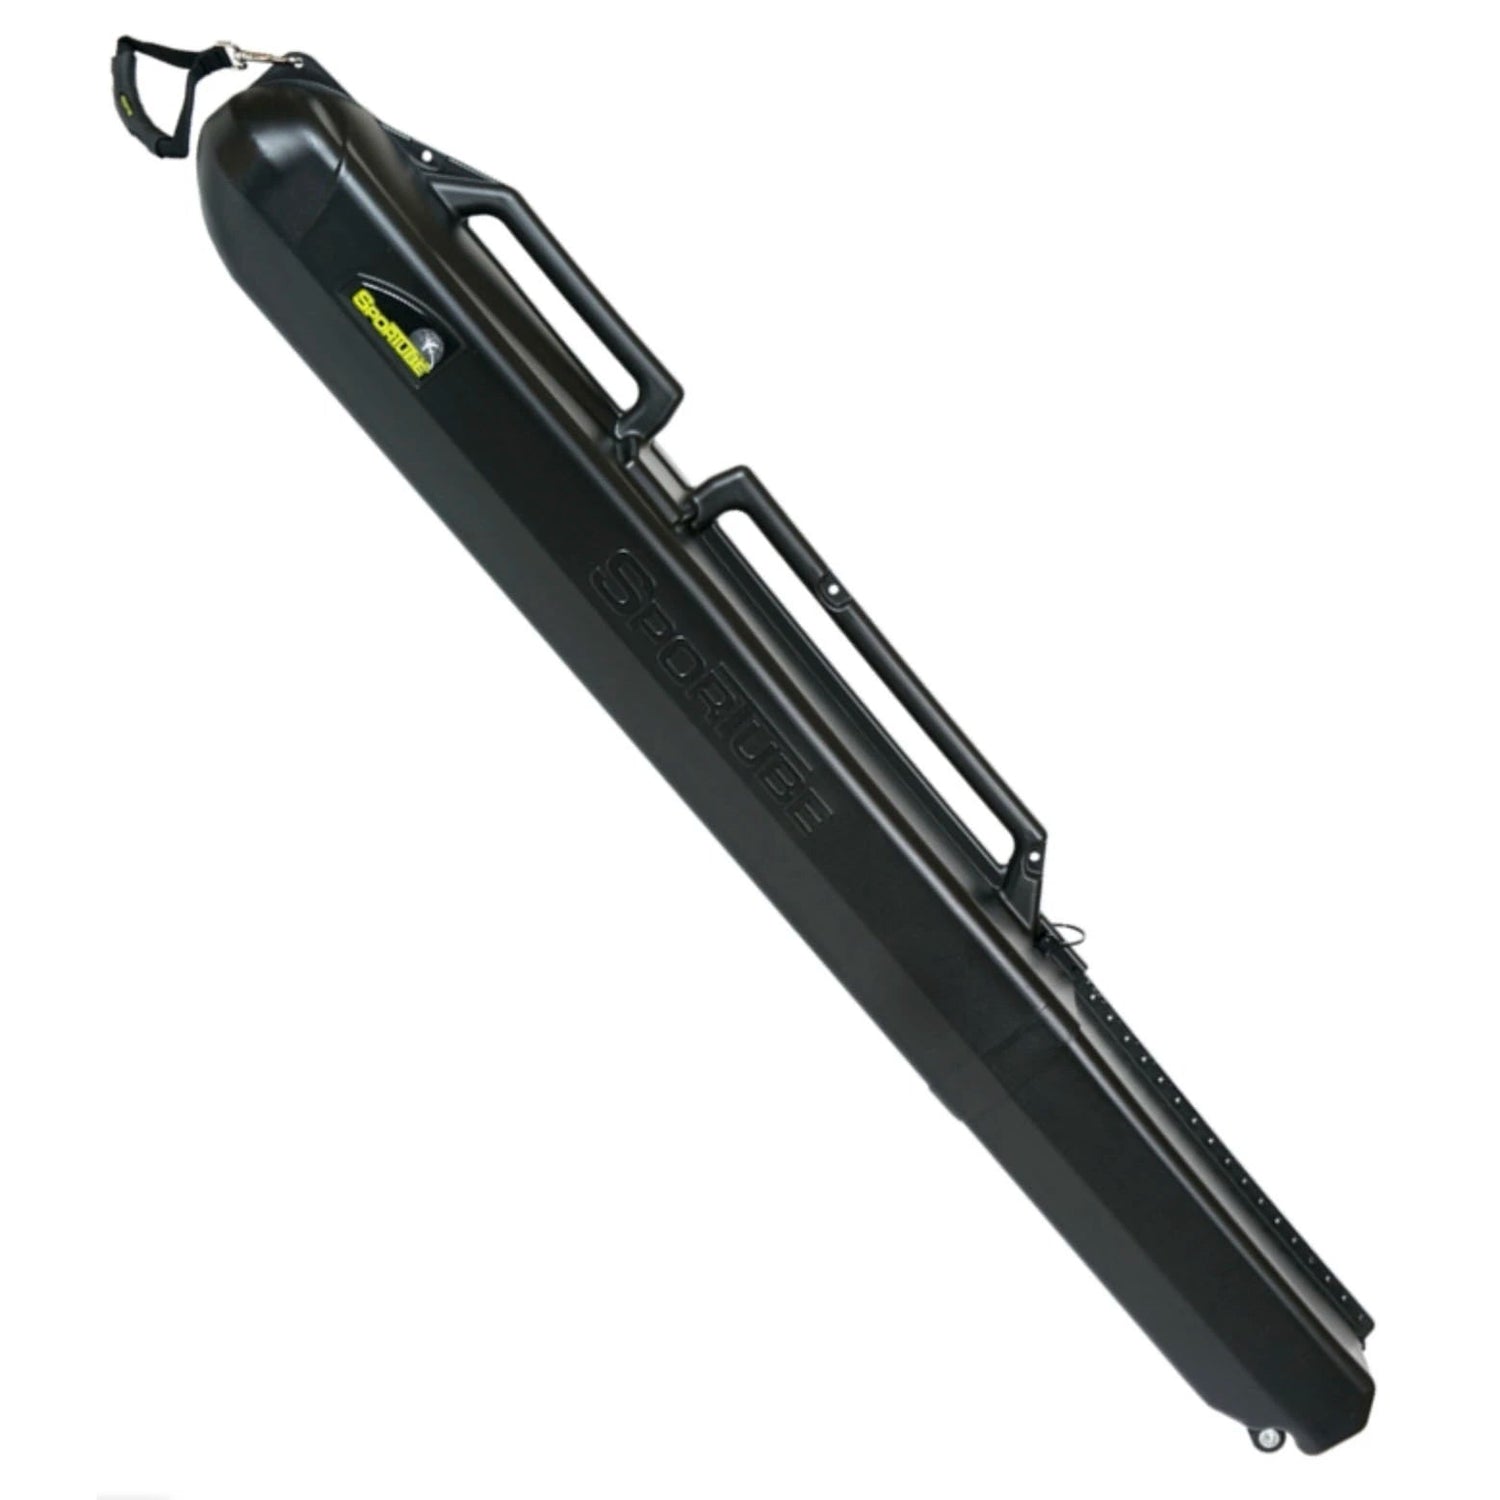 Buy Plano Guide Series Adjustable Rod Travel Case Large online at